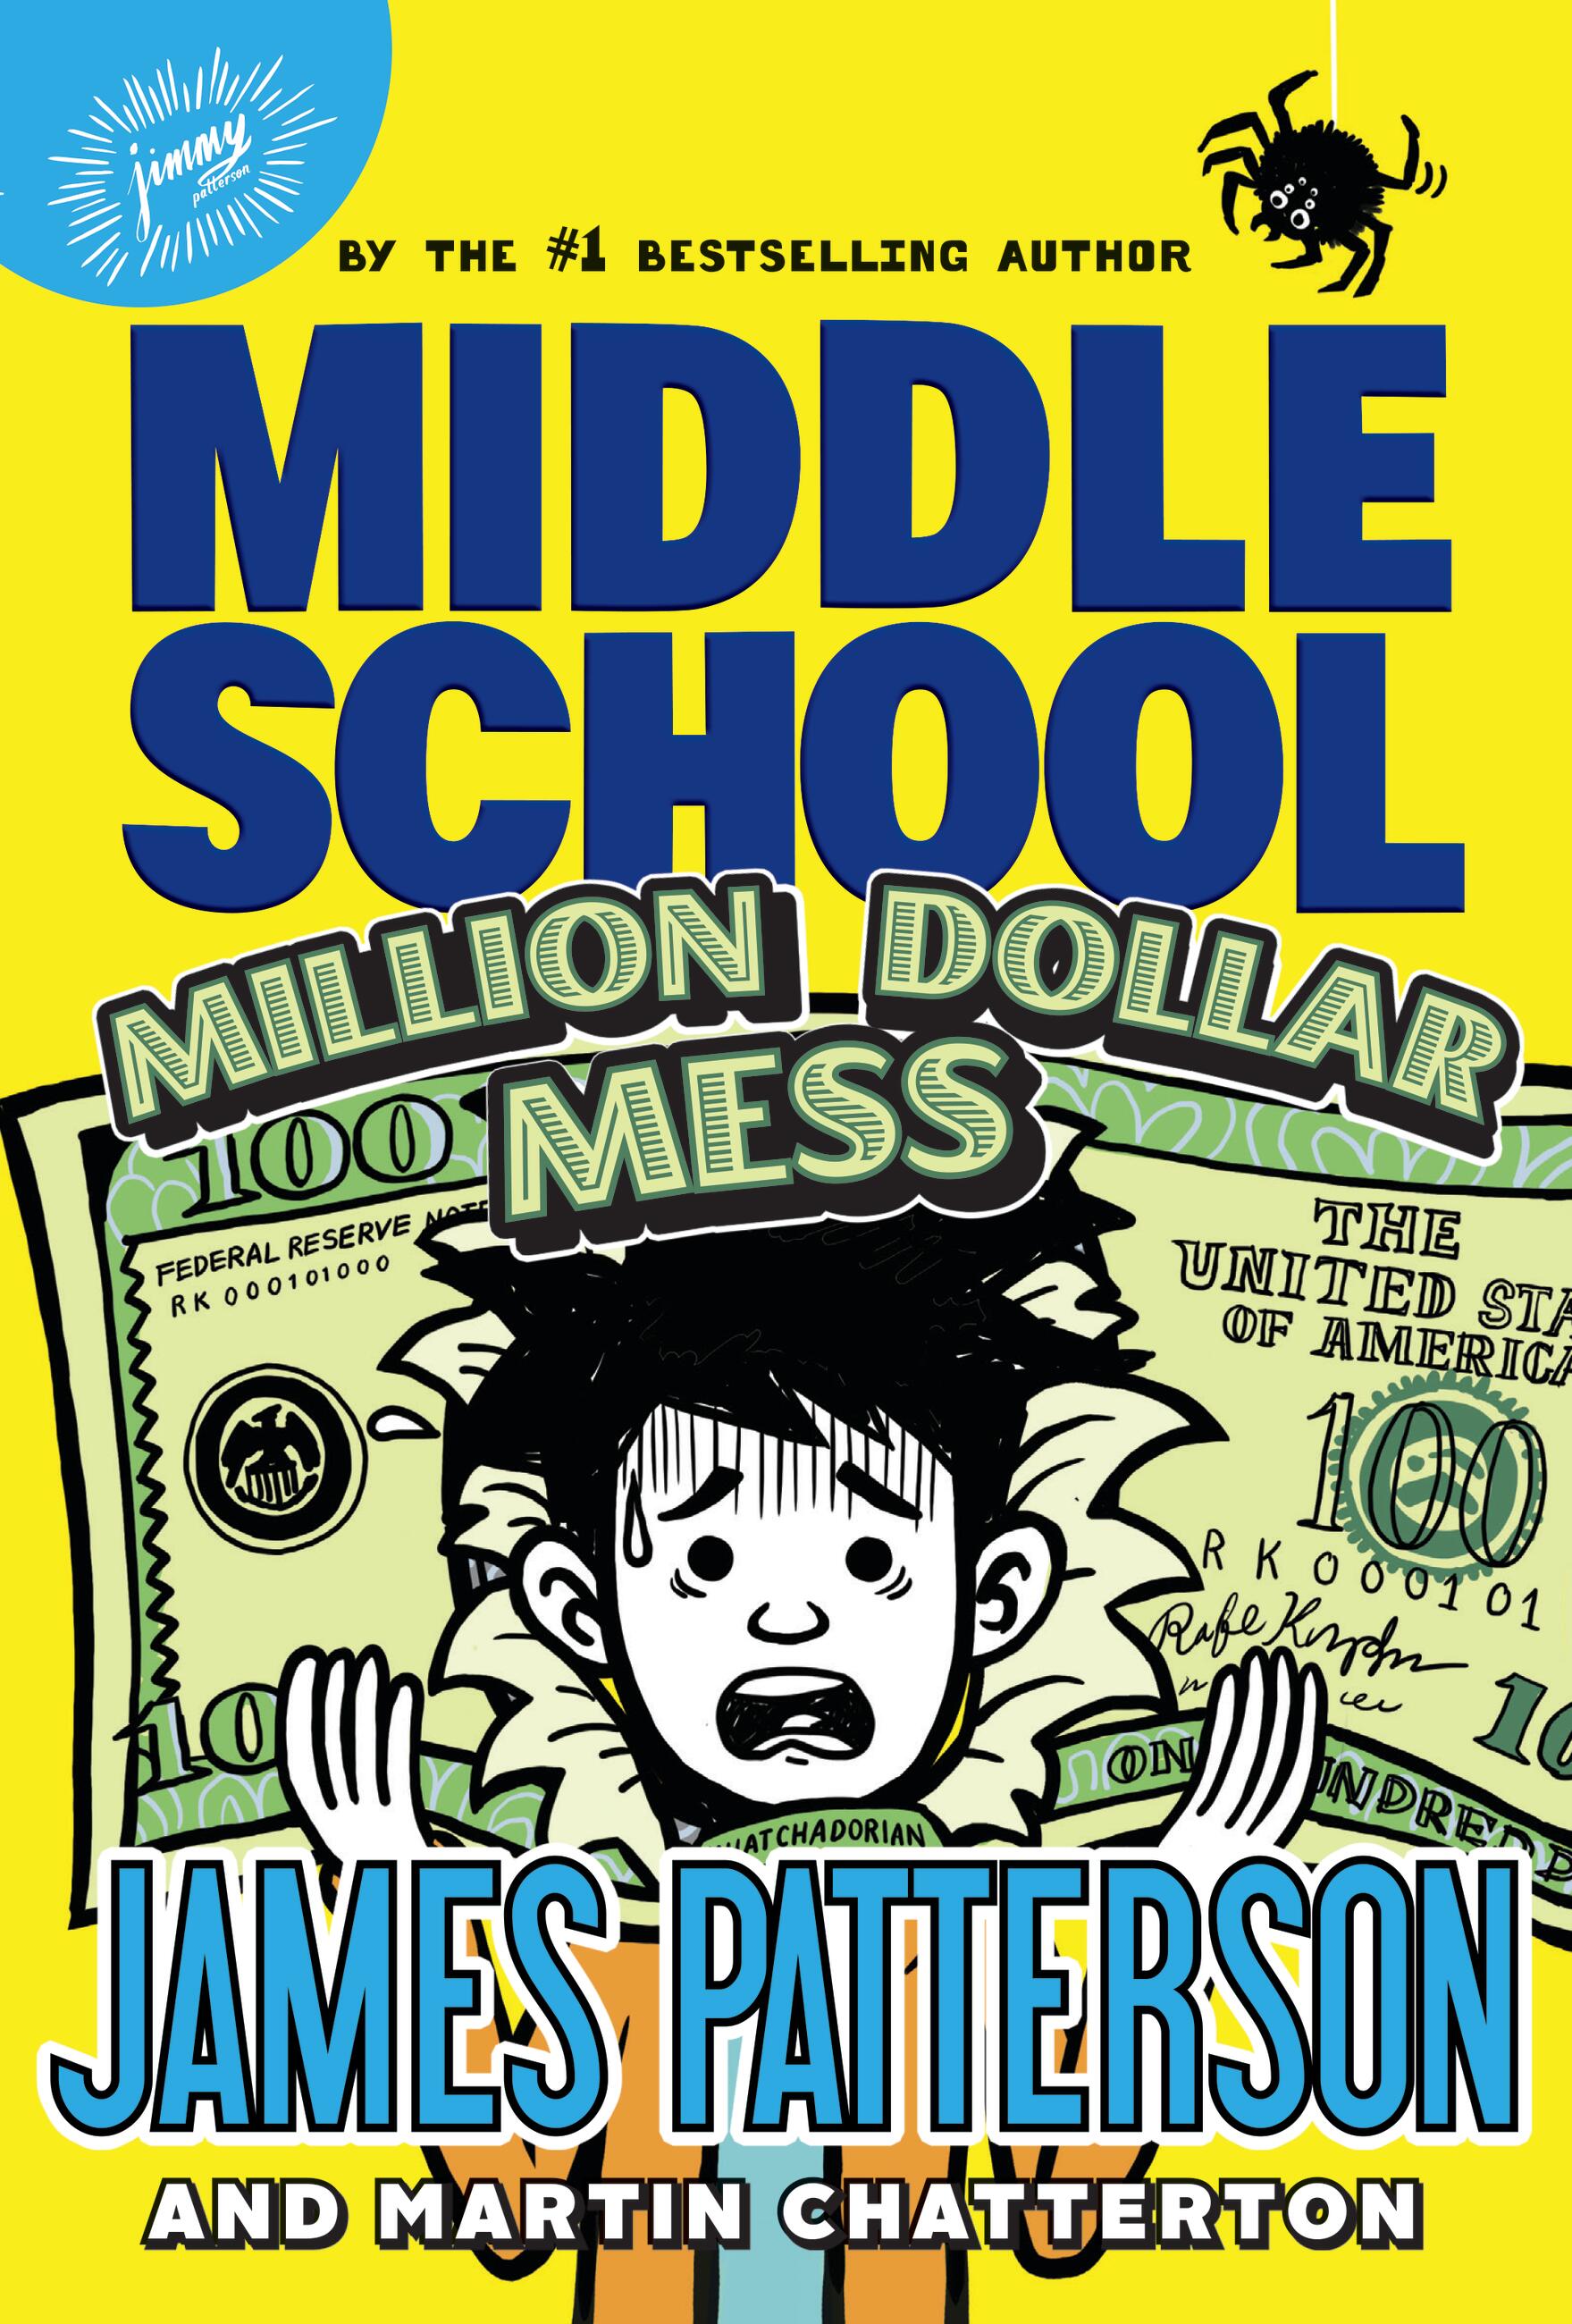 Middle School: Million Dollar Mess by James Patterson